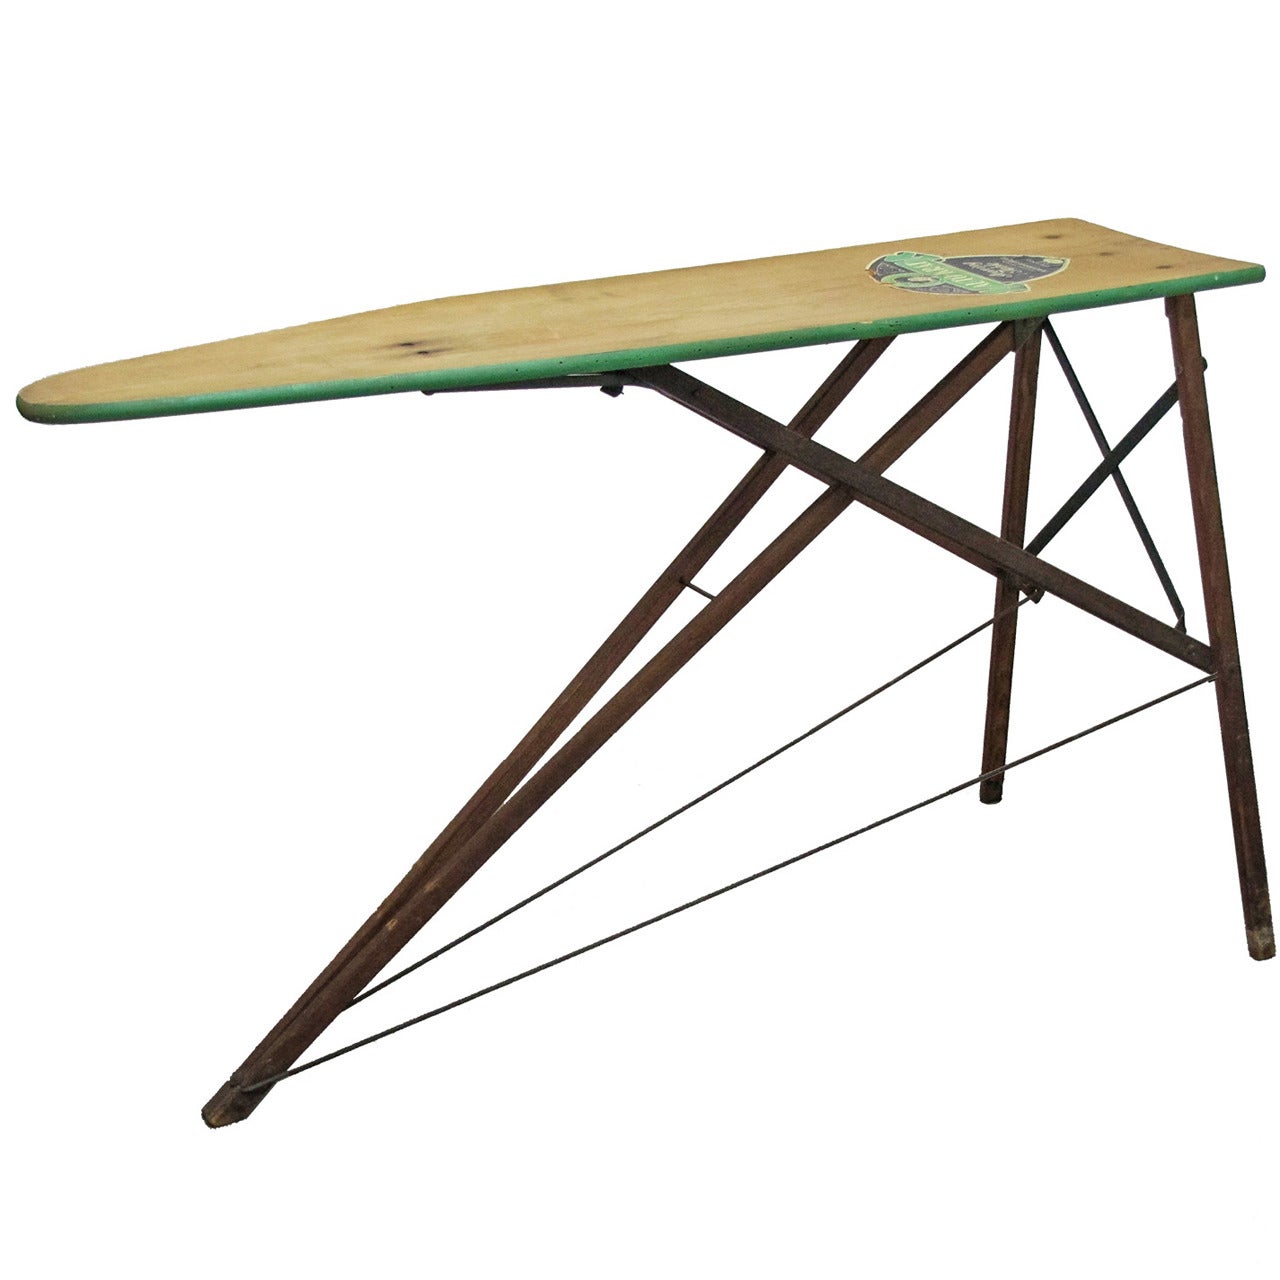 1930's Wooden Ironing Board